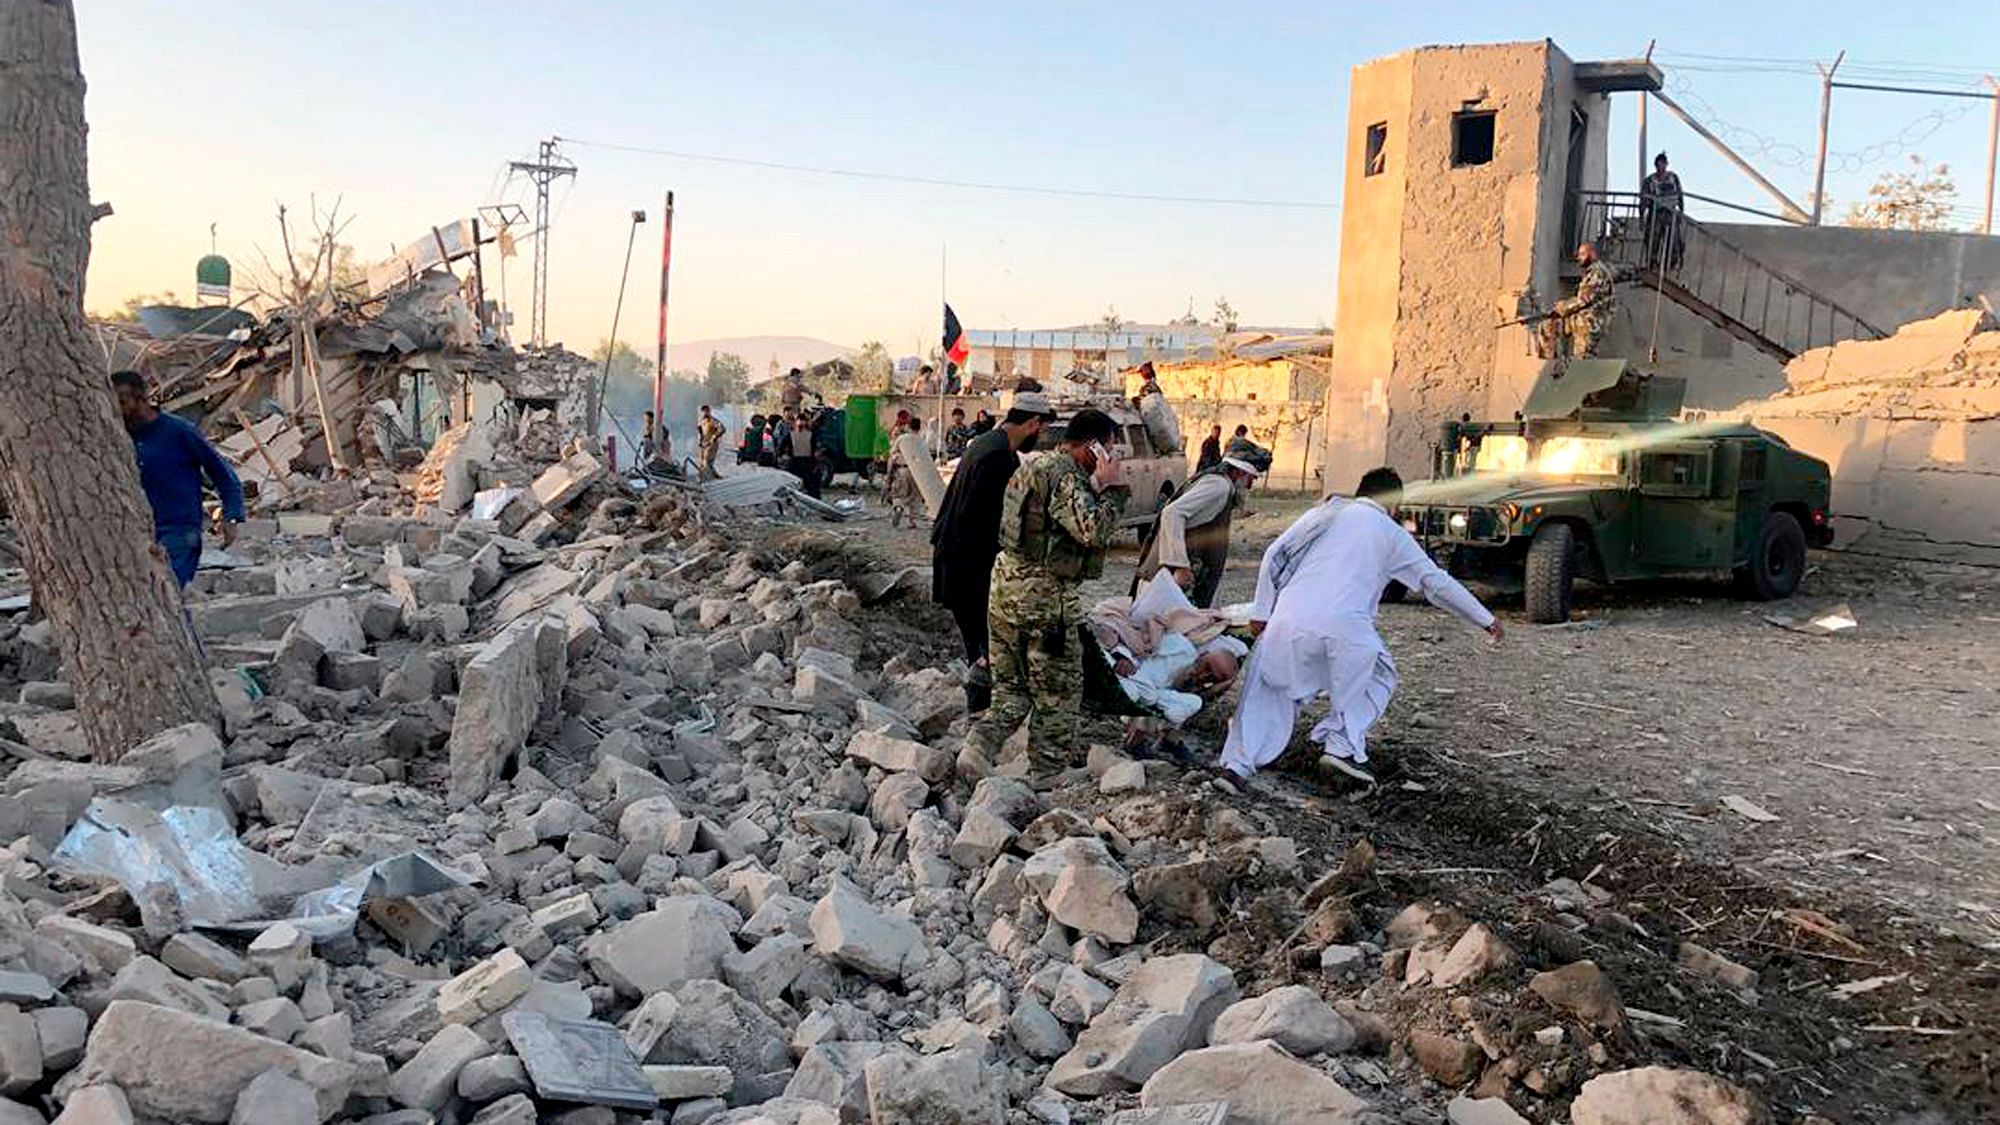 Afghan security members and people engage in rescue work at the site of the blast.